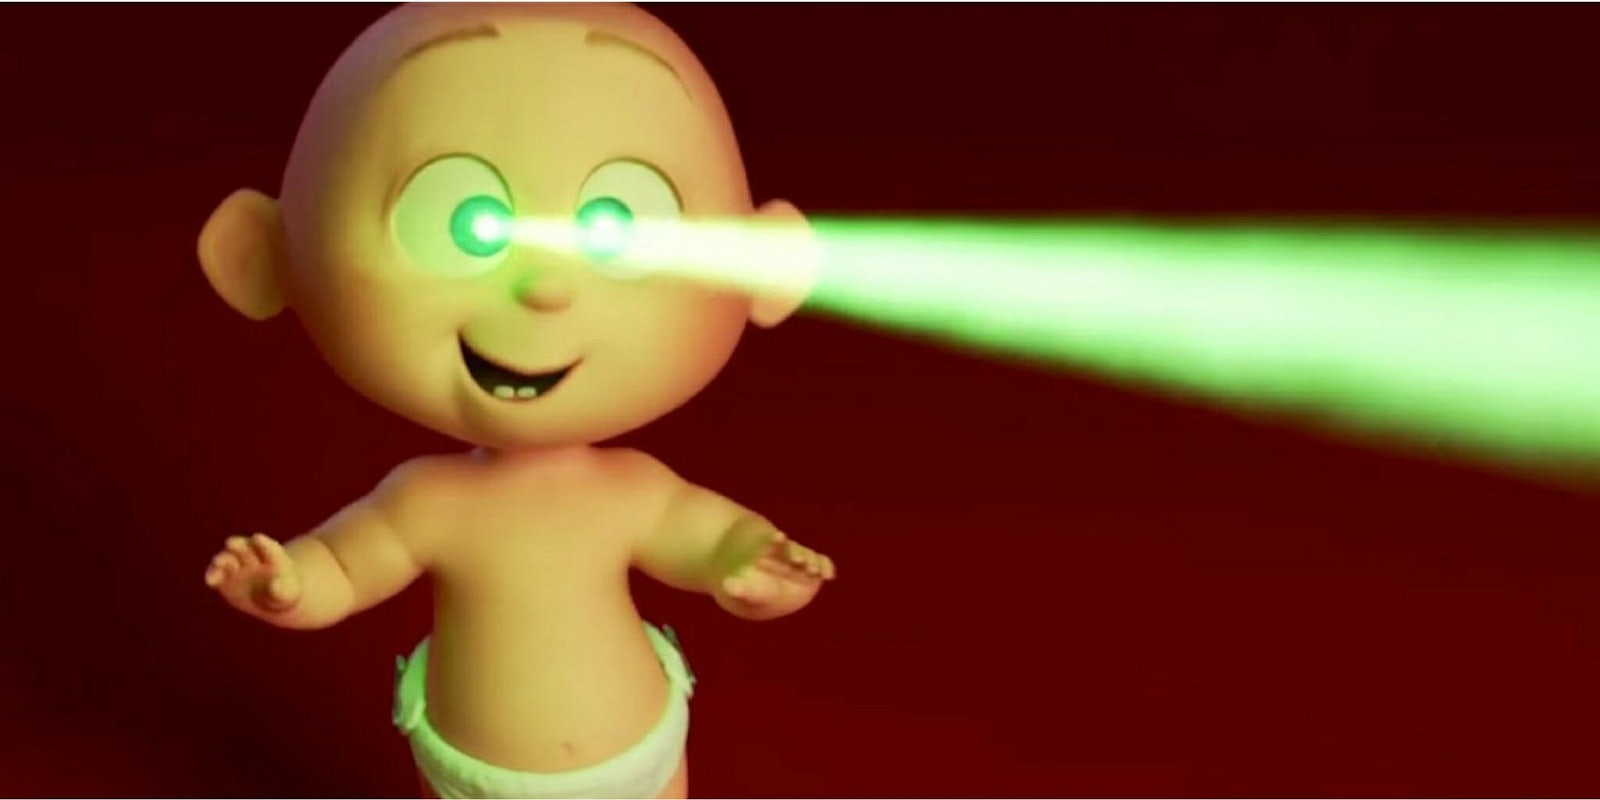 The 'Incredibles 2' is here and Jack Jack has powers.